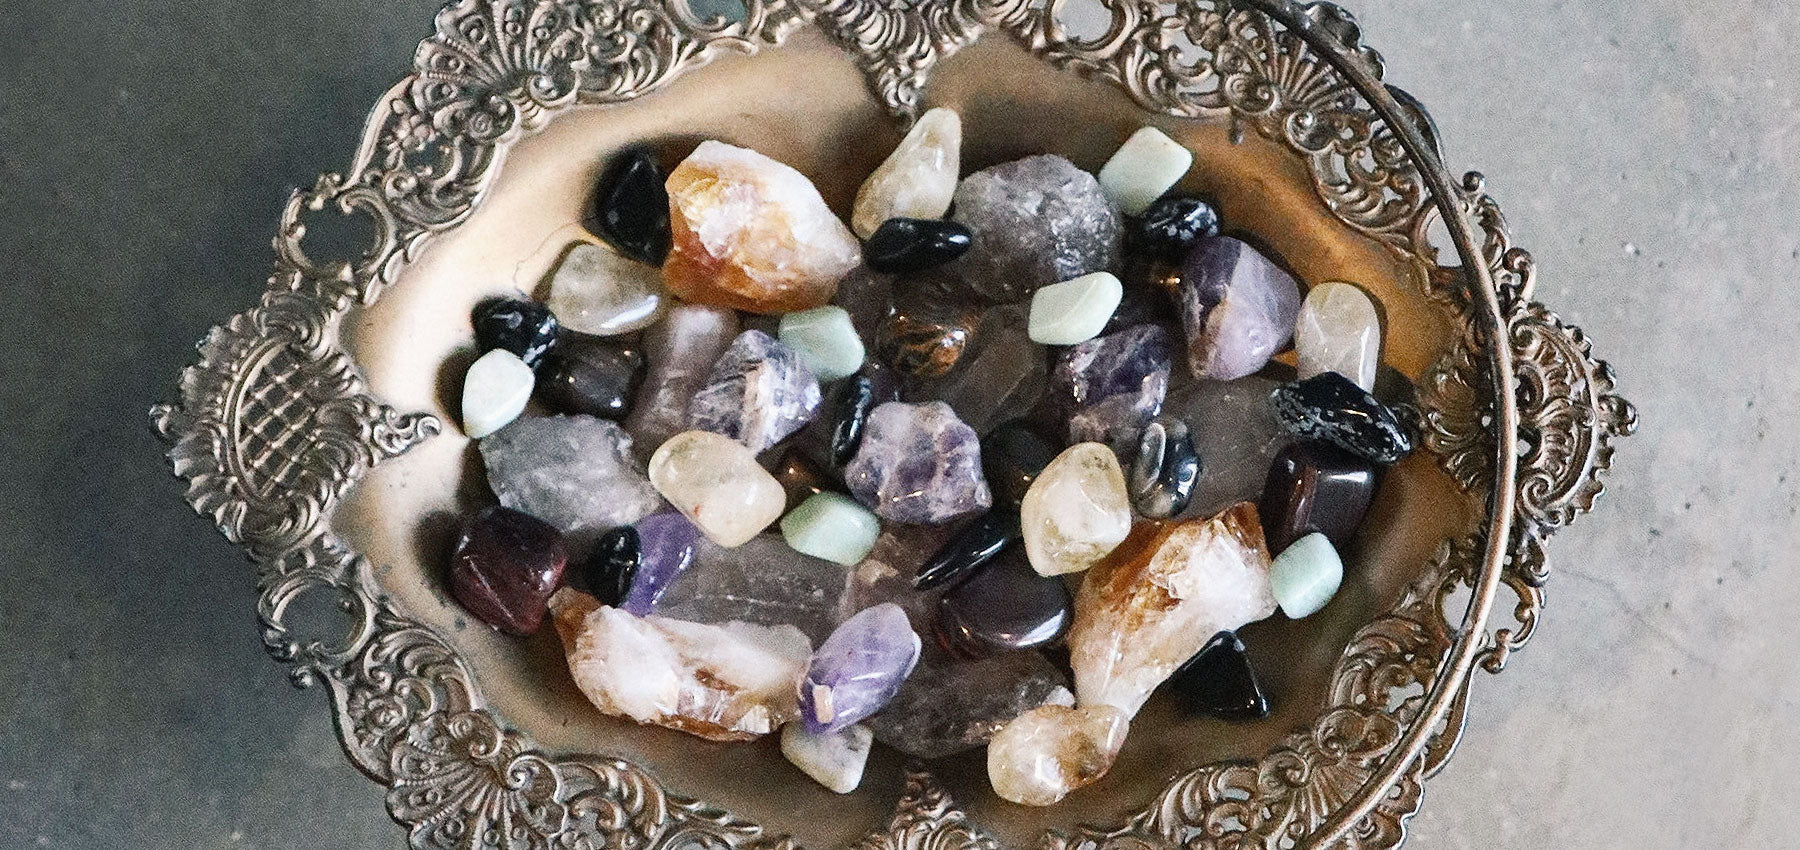 1oz Bags of SMALL Tumbled Crystals / Authentic Tumbled Stones / Amethyst /  Agate / Tiger's Eye / Sodalite / Aventurine / Rose Quartz 